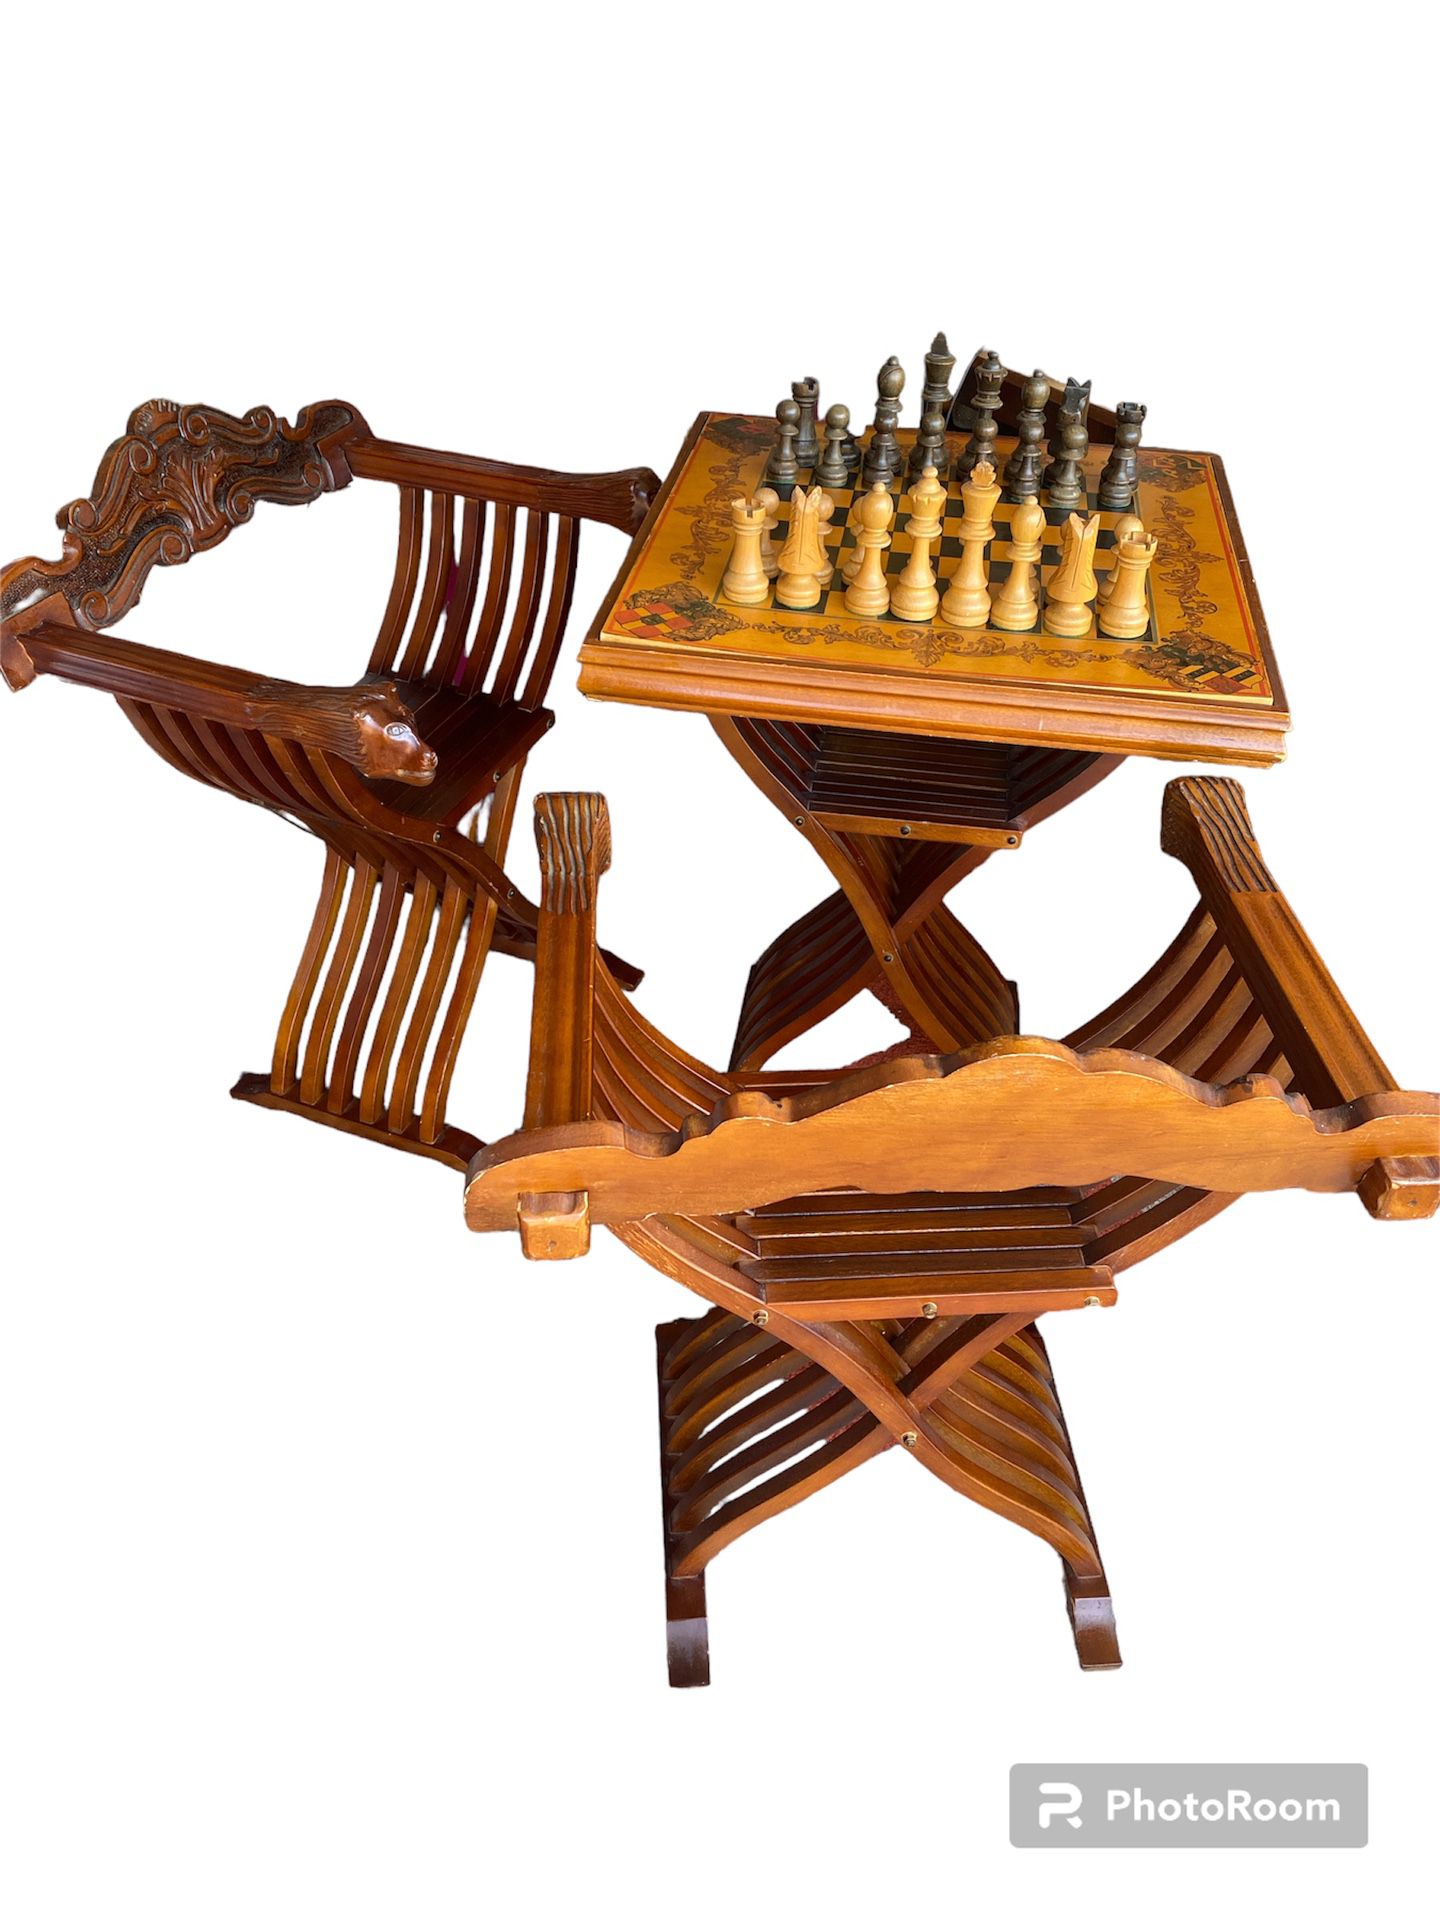 vintage carved wood Savonarola style folding chess backgammon game table set 3 pieces with chairs